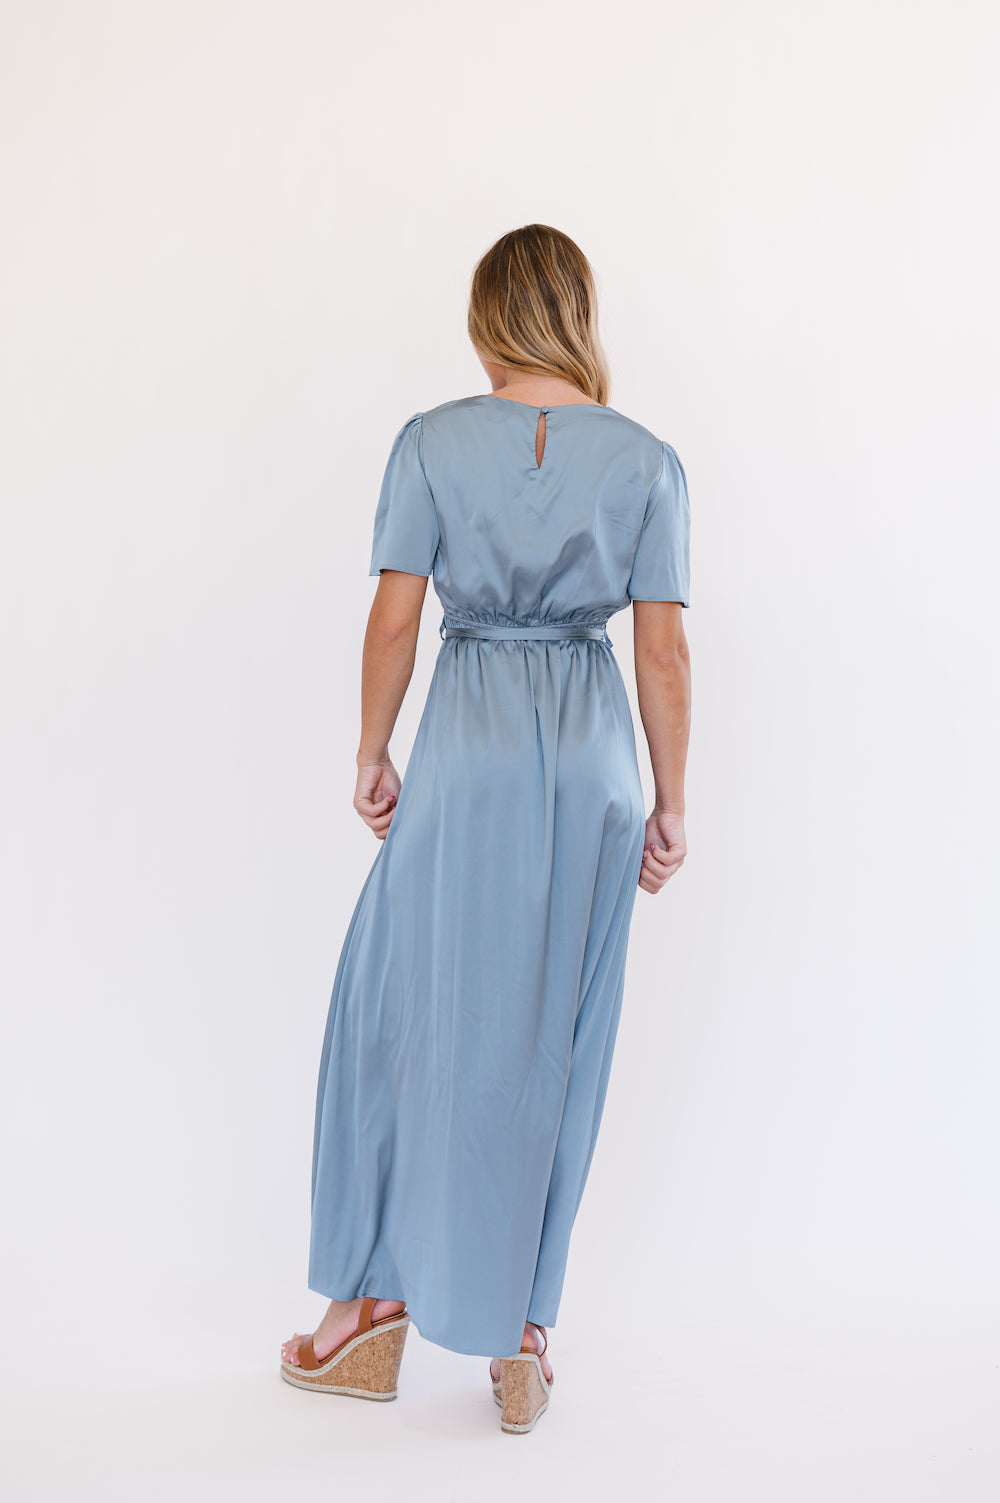 Dusty blue satin finish dress with flutter sleeves